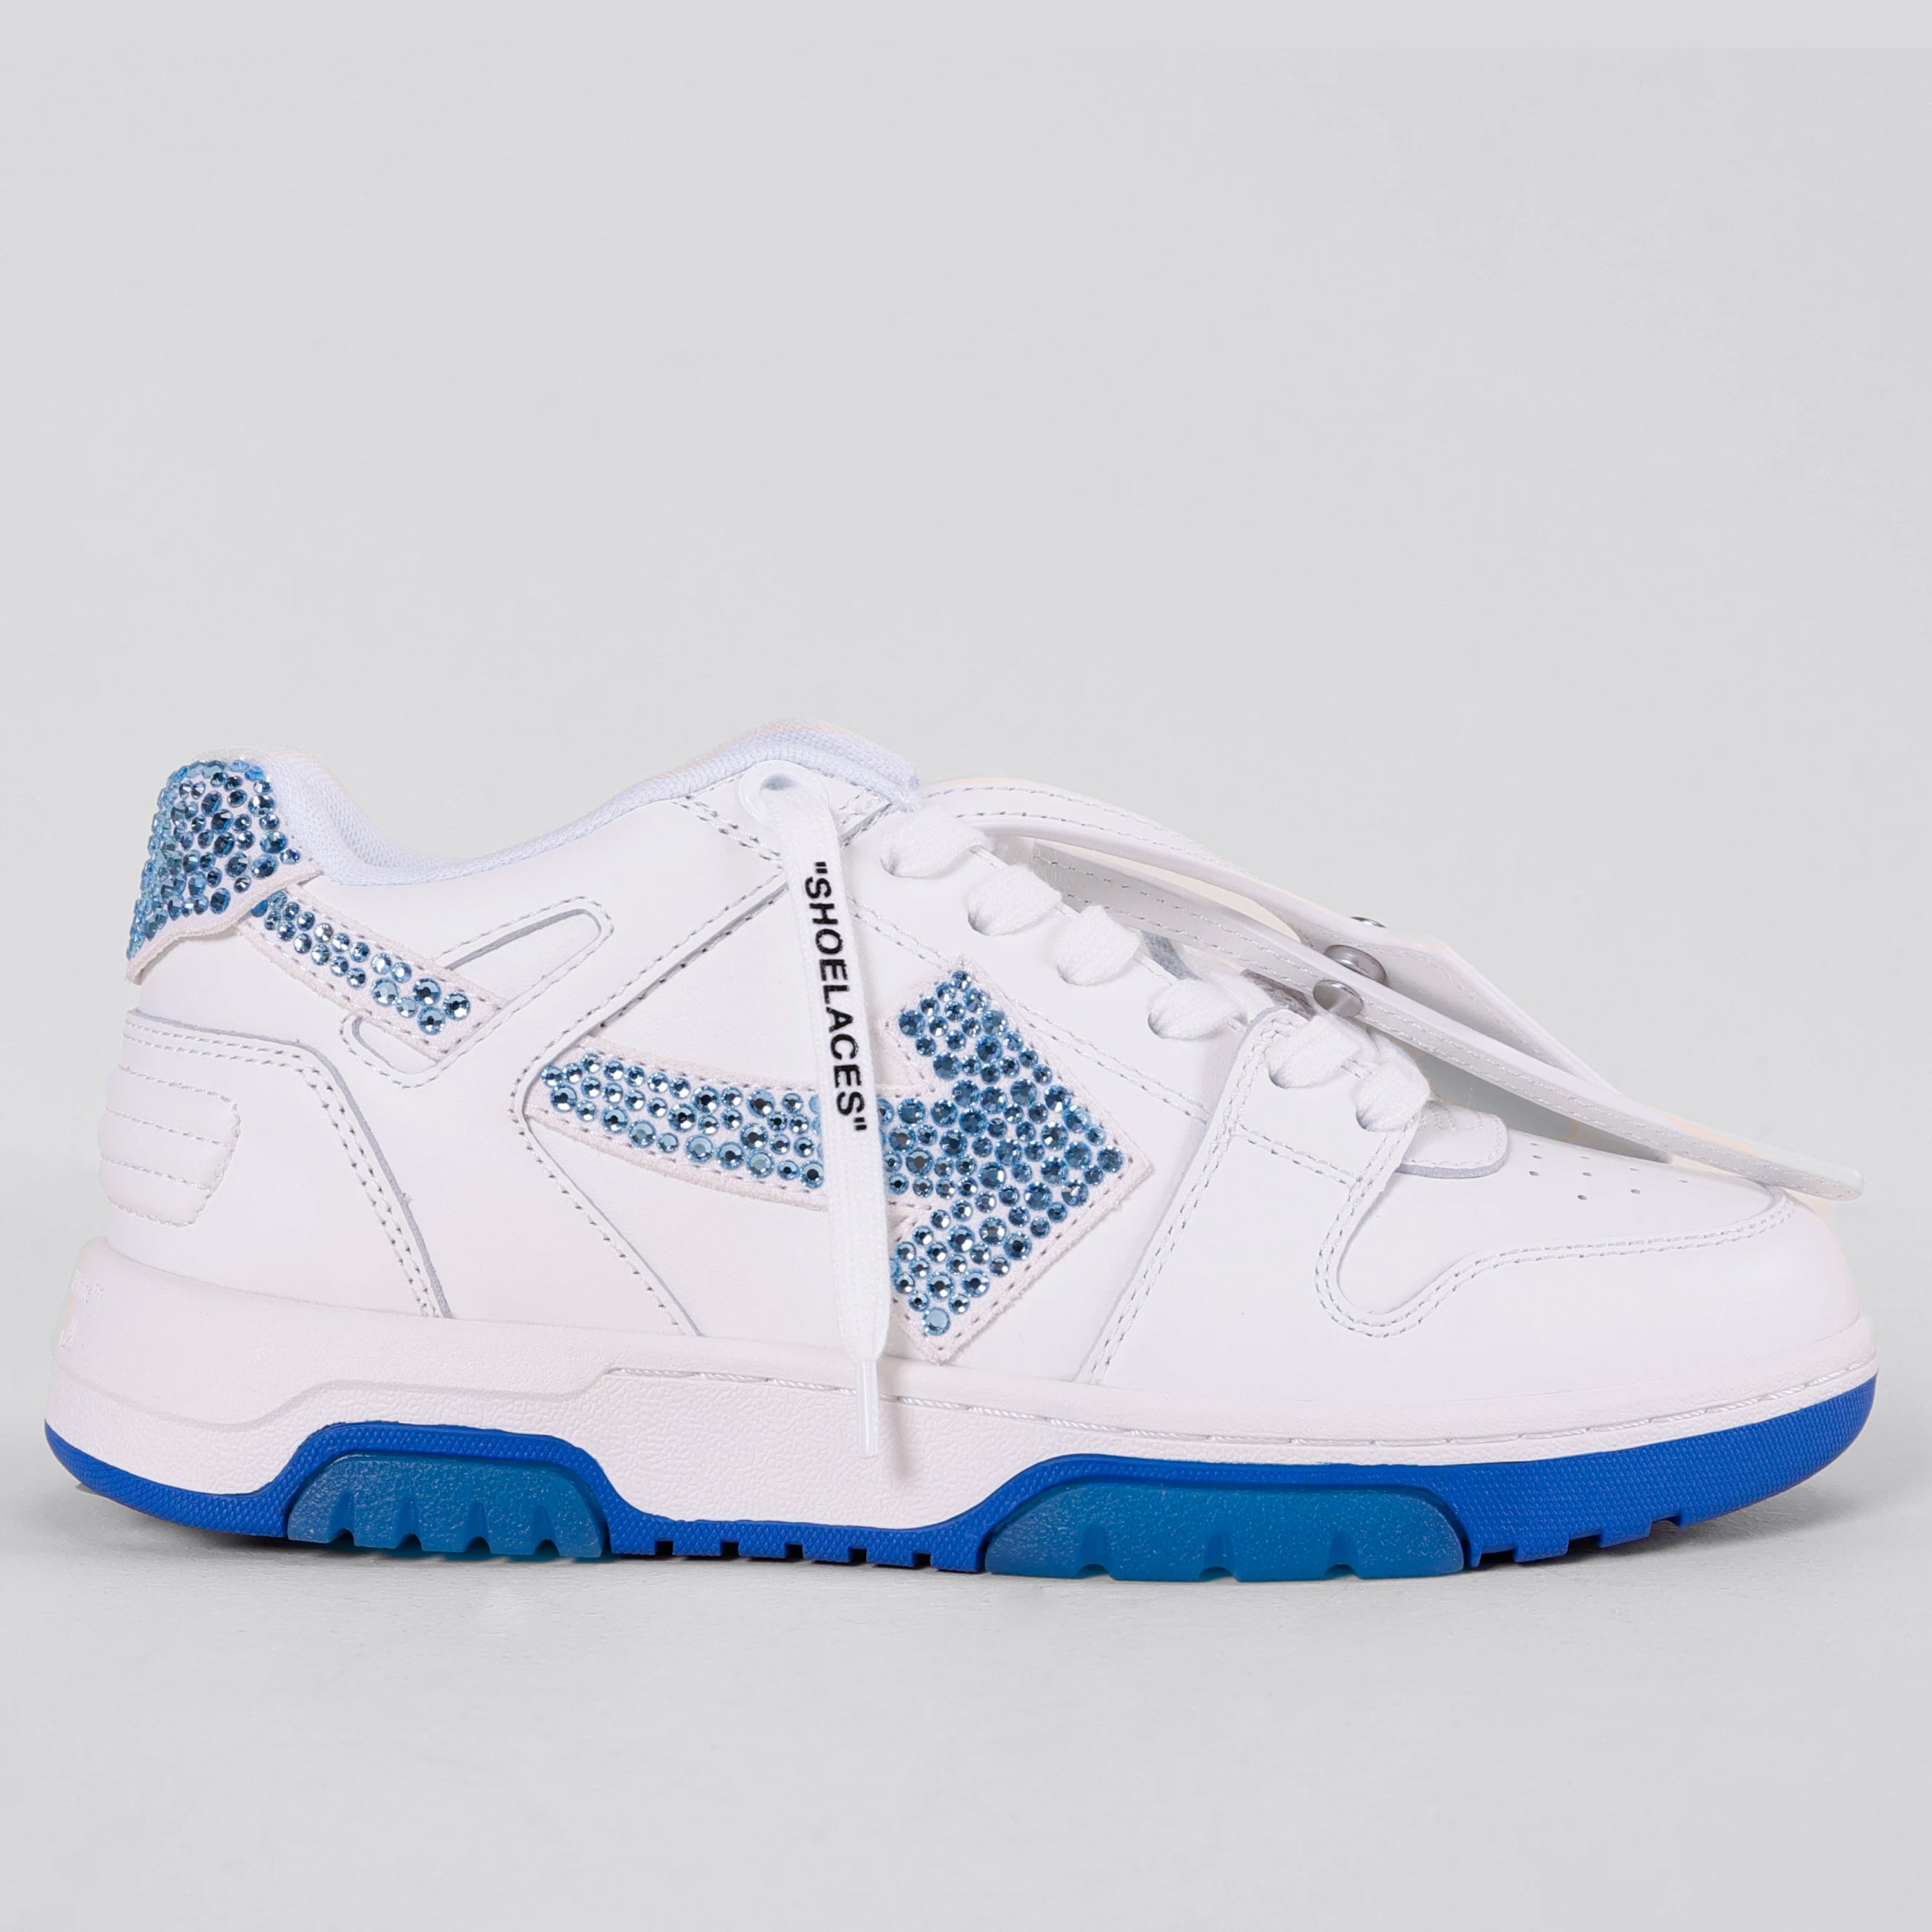 Sneakers Blanco Azul Off-White "OOO" Crystals